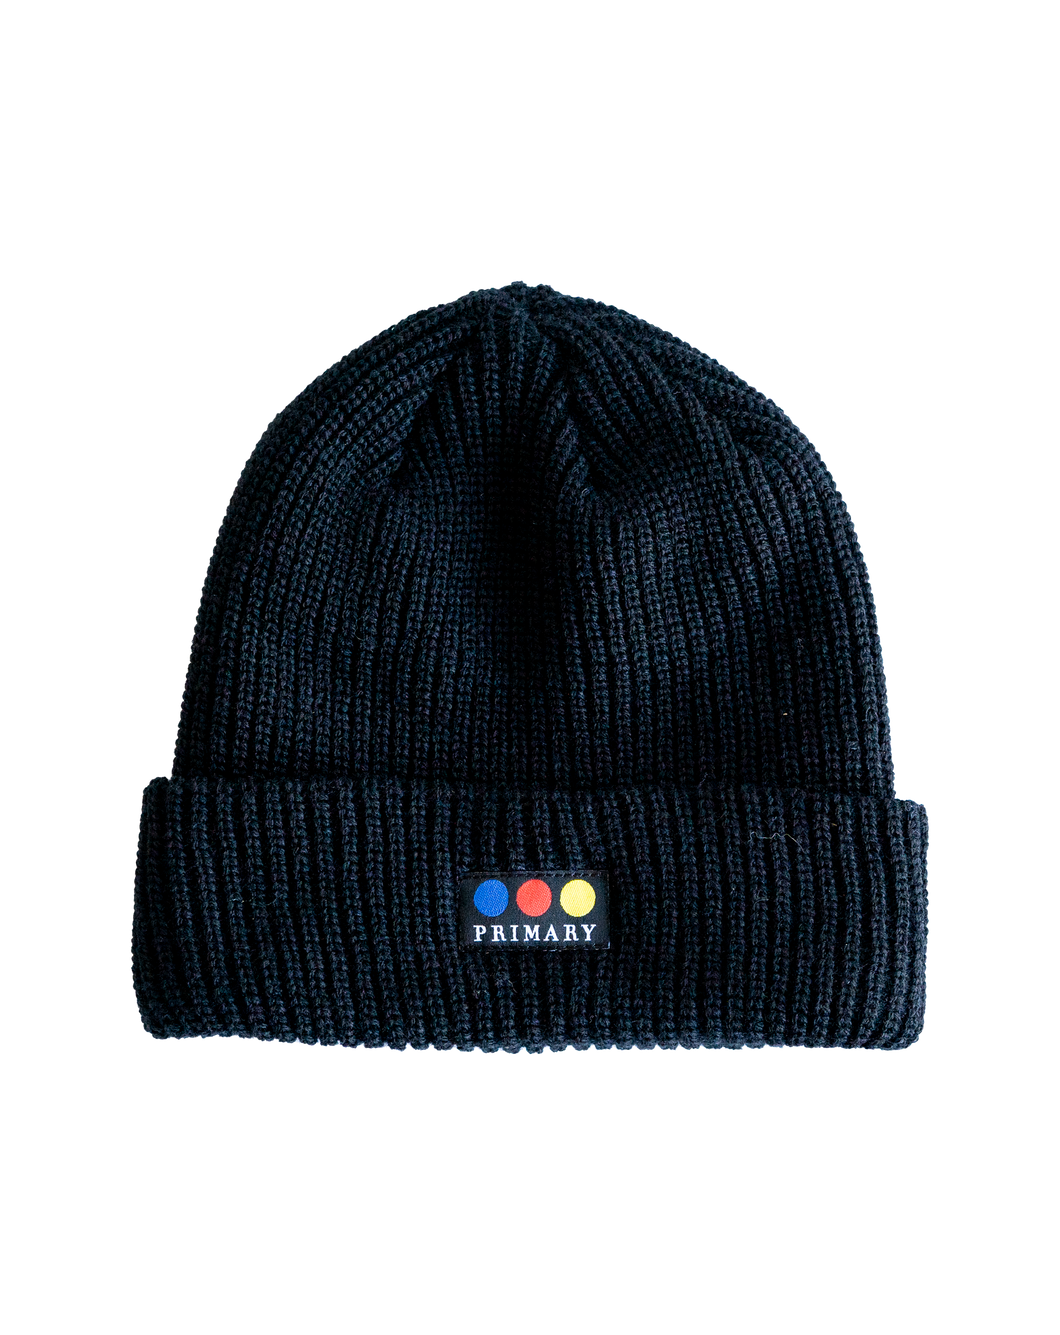 Primary skateboards - Watchman Ribbed Beanie in Black